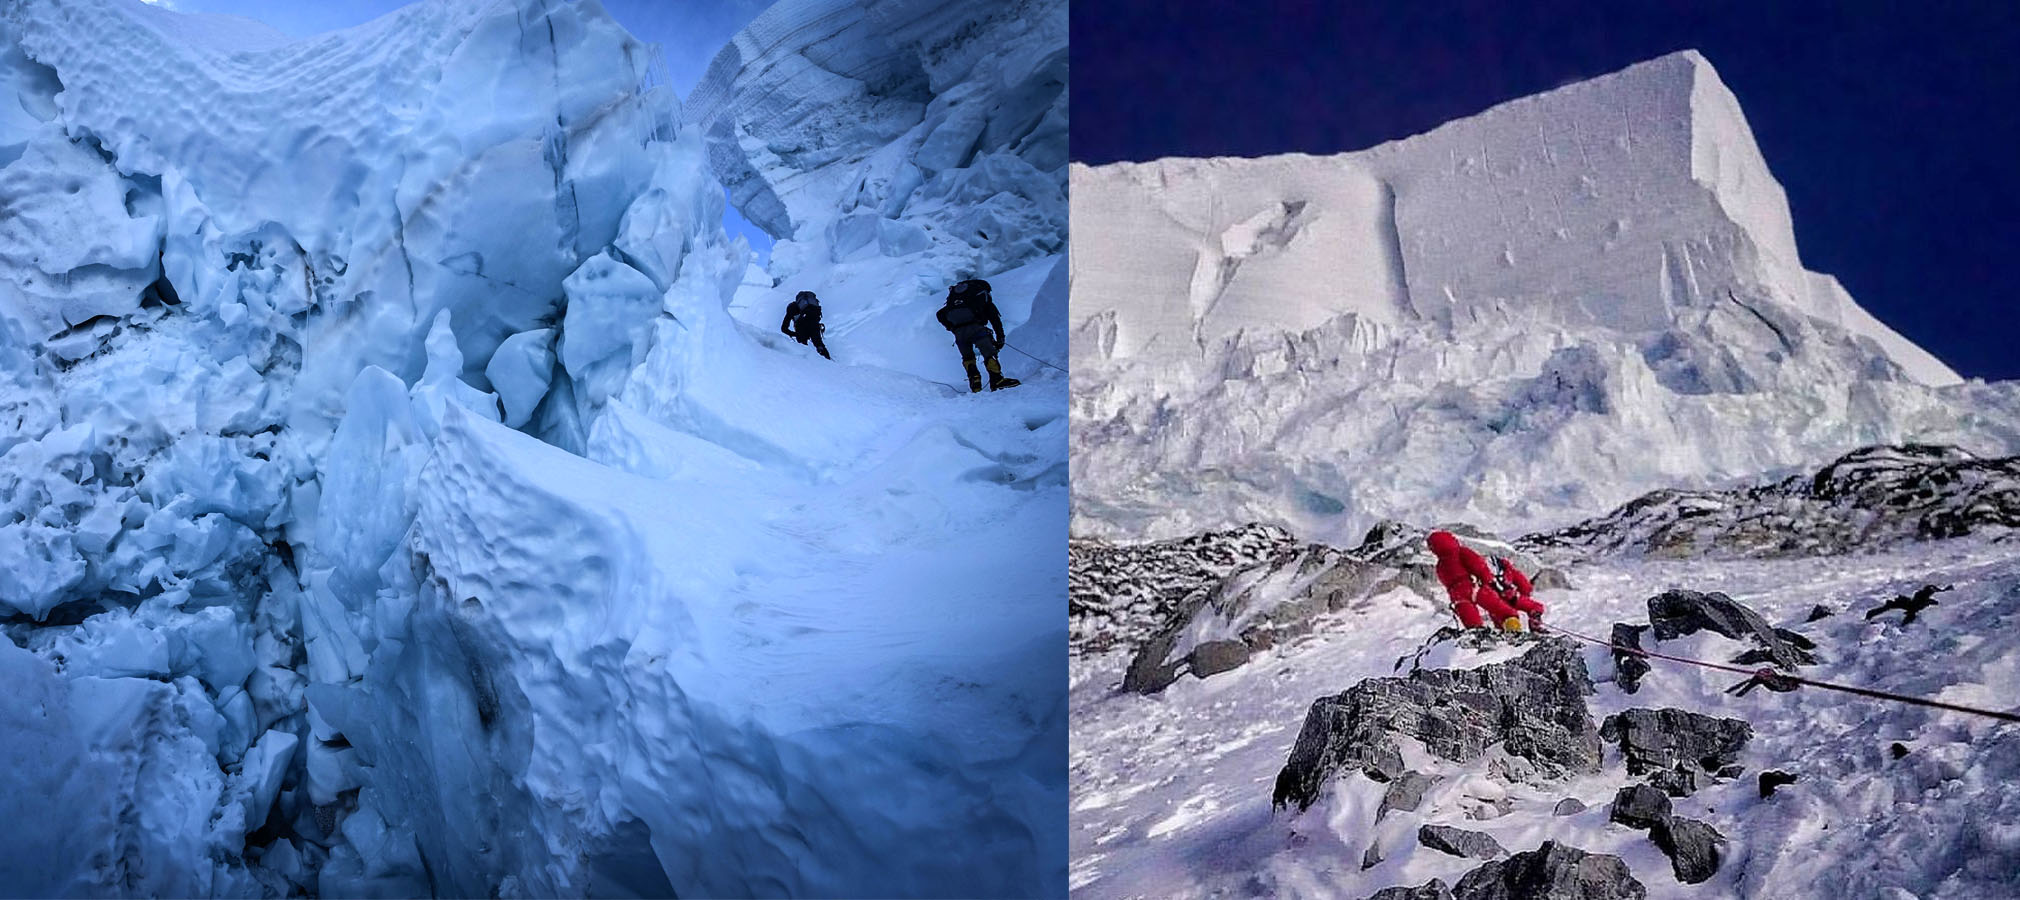 Comparing the Difficulty and Danger of the Khumbu Glacier on Mount